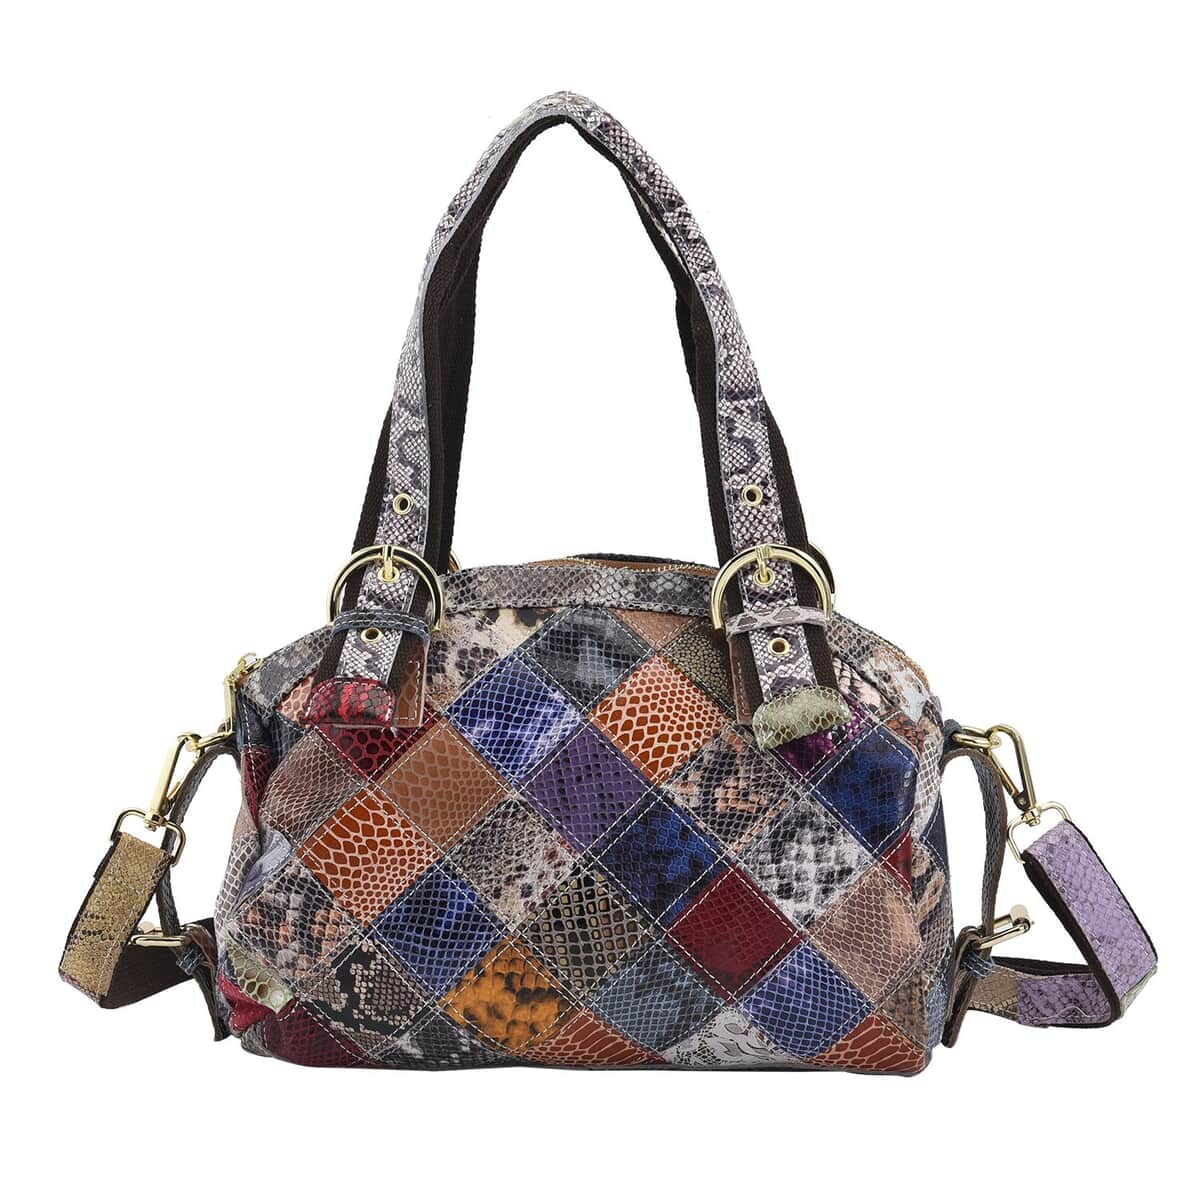 CHAOS Rainbow Color Snake Print Genuine Leather Convertible Tote Bag (12"x5"x9") with Long Strap image number 0